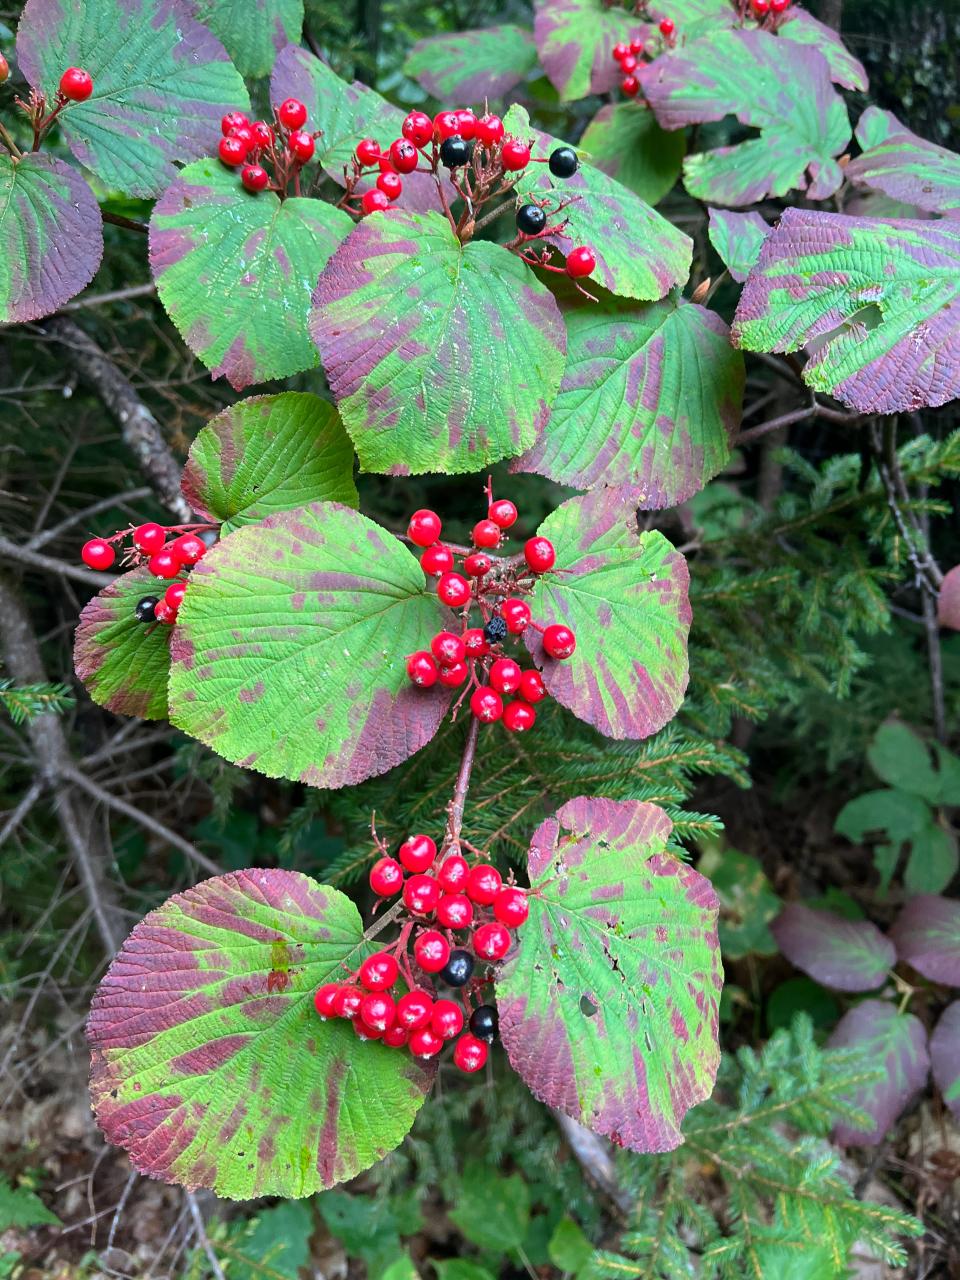 Hobblebush is type of shrub that grows in the eastern U.S. and Canada and has white or pink flowers and purple-black berries.